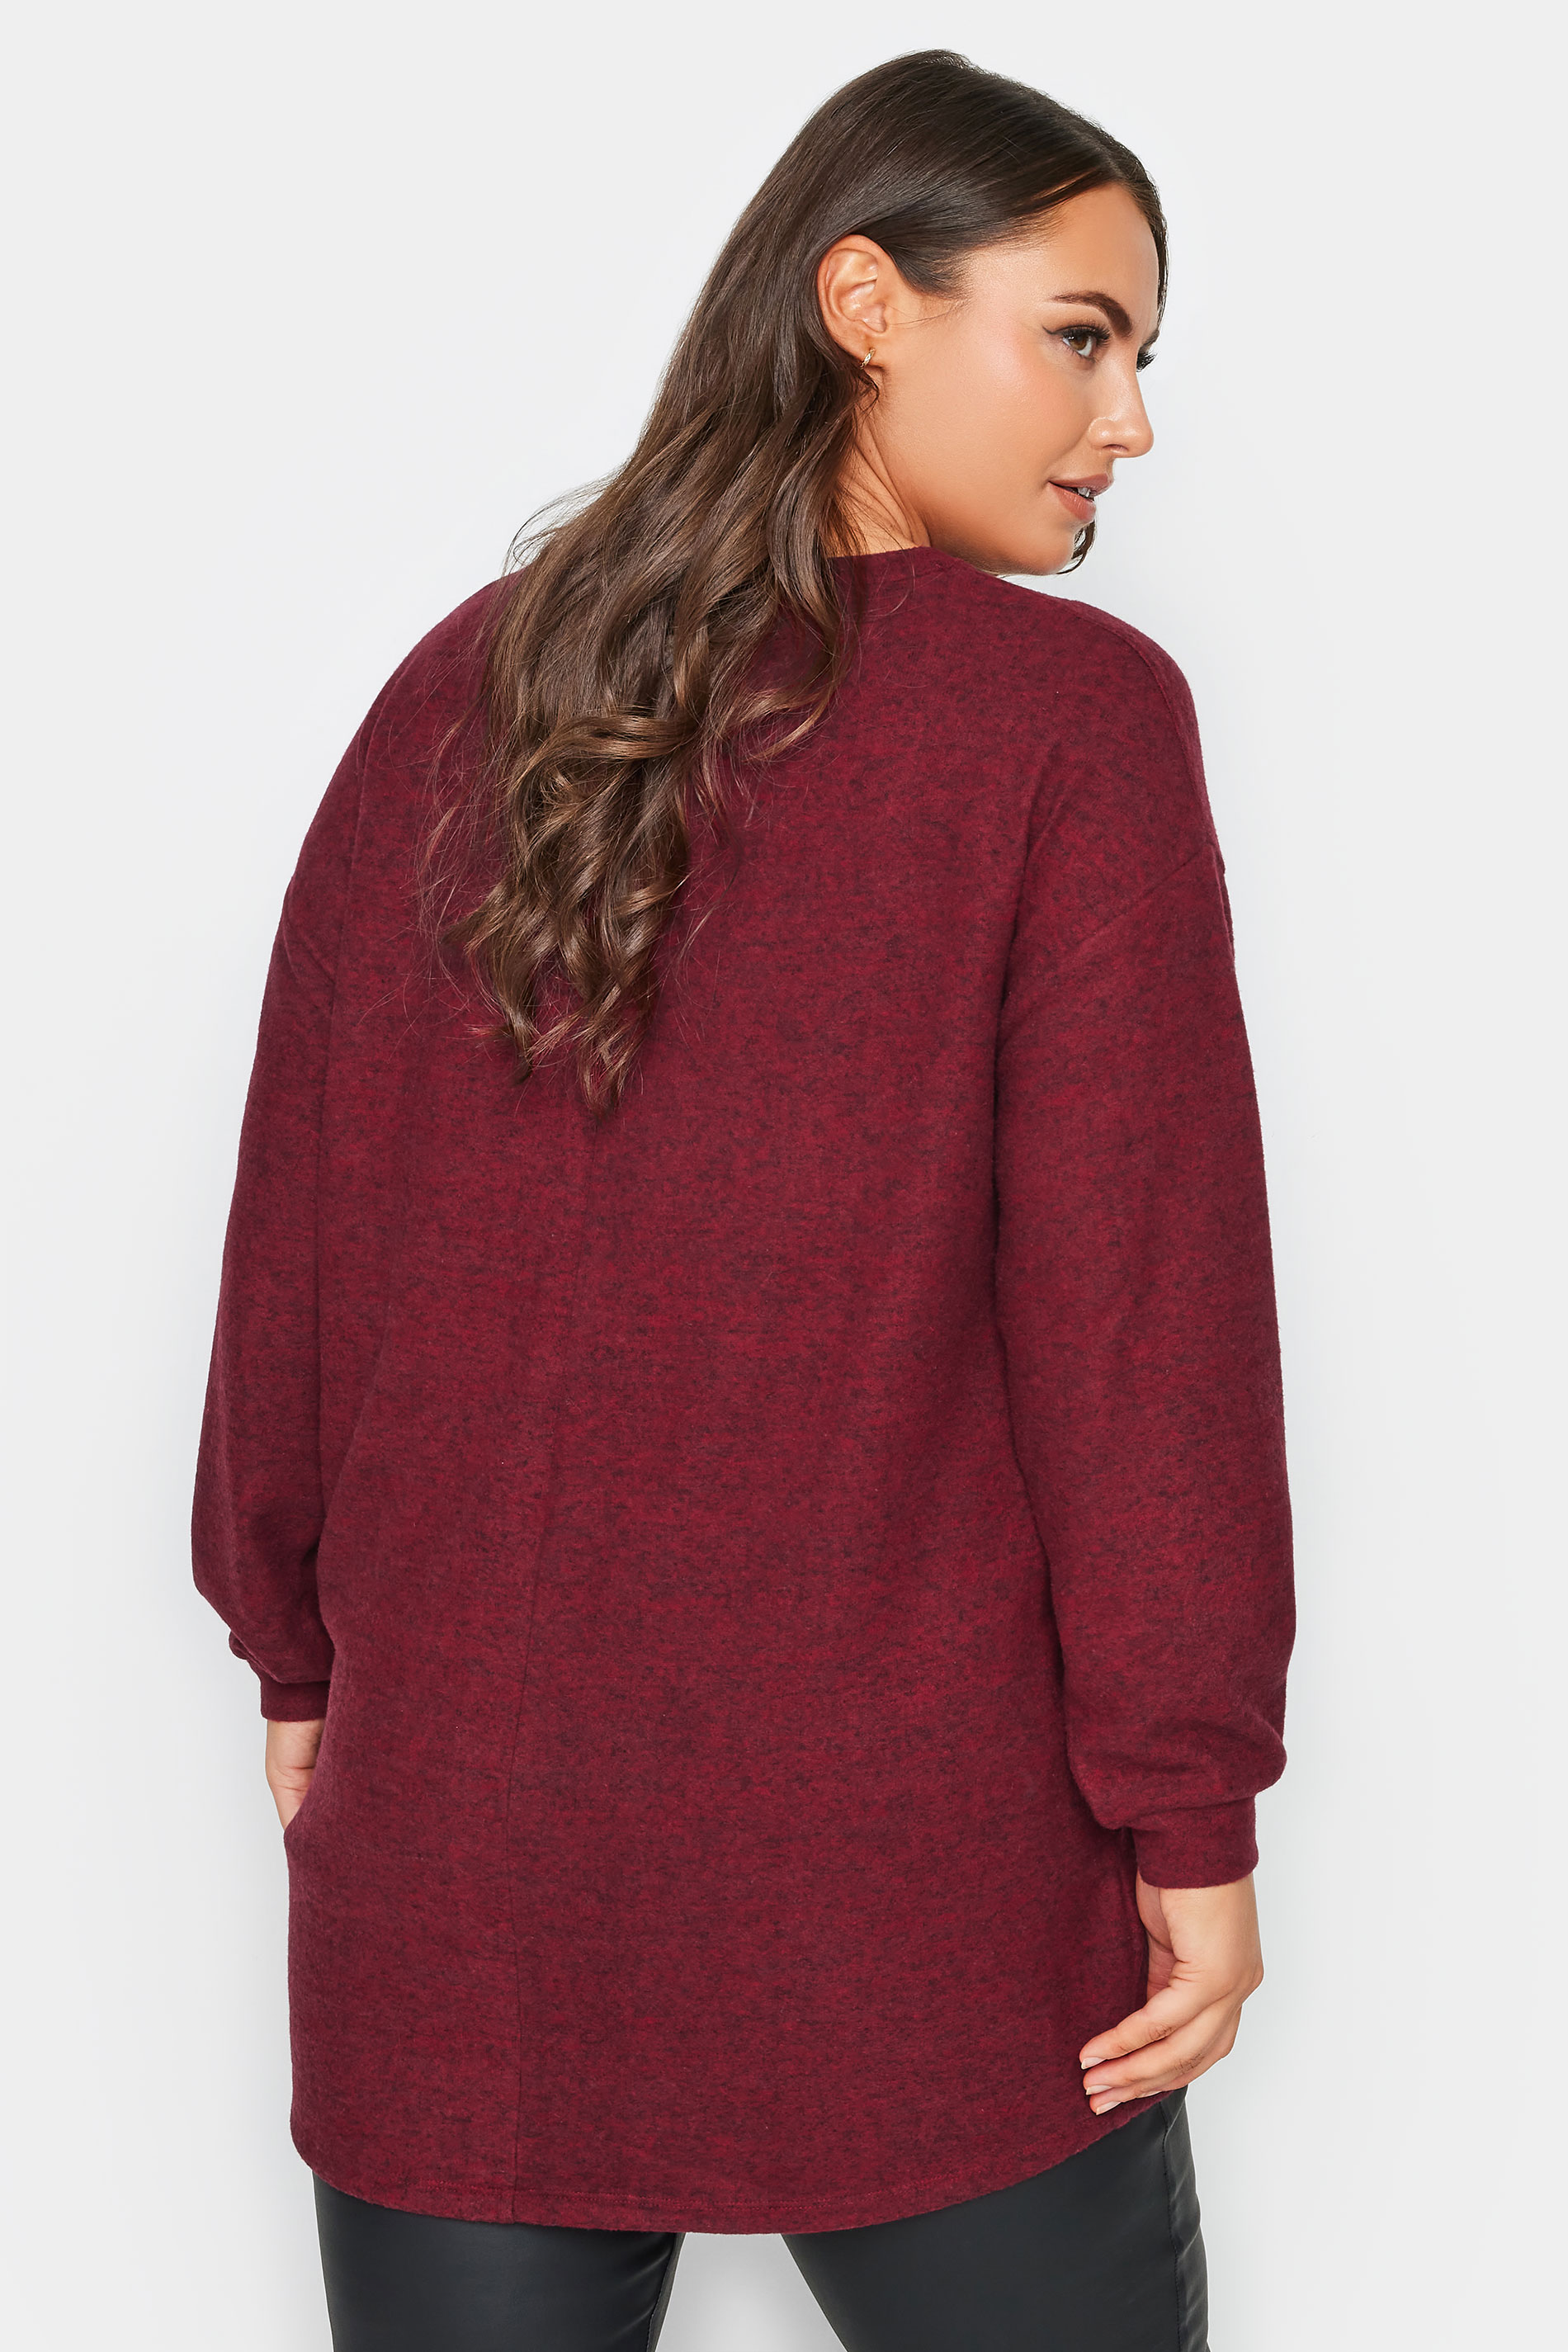 YOURS Plus Size Burgundy Red Sequin Embellished Stripe Jumper | Yours Clothing 3